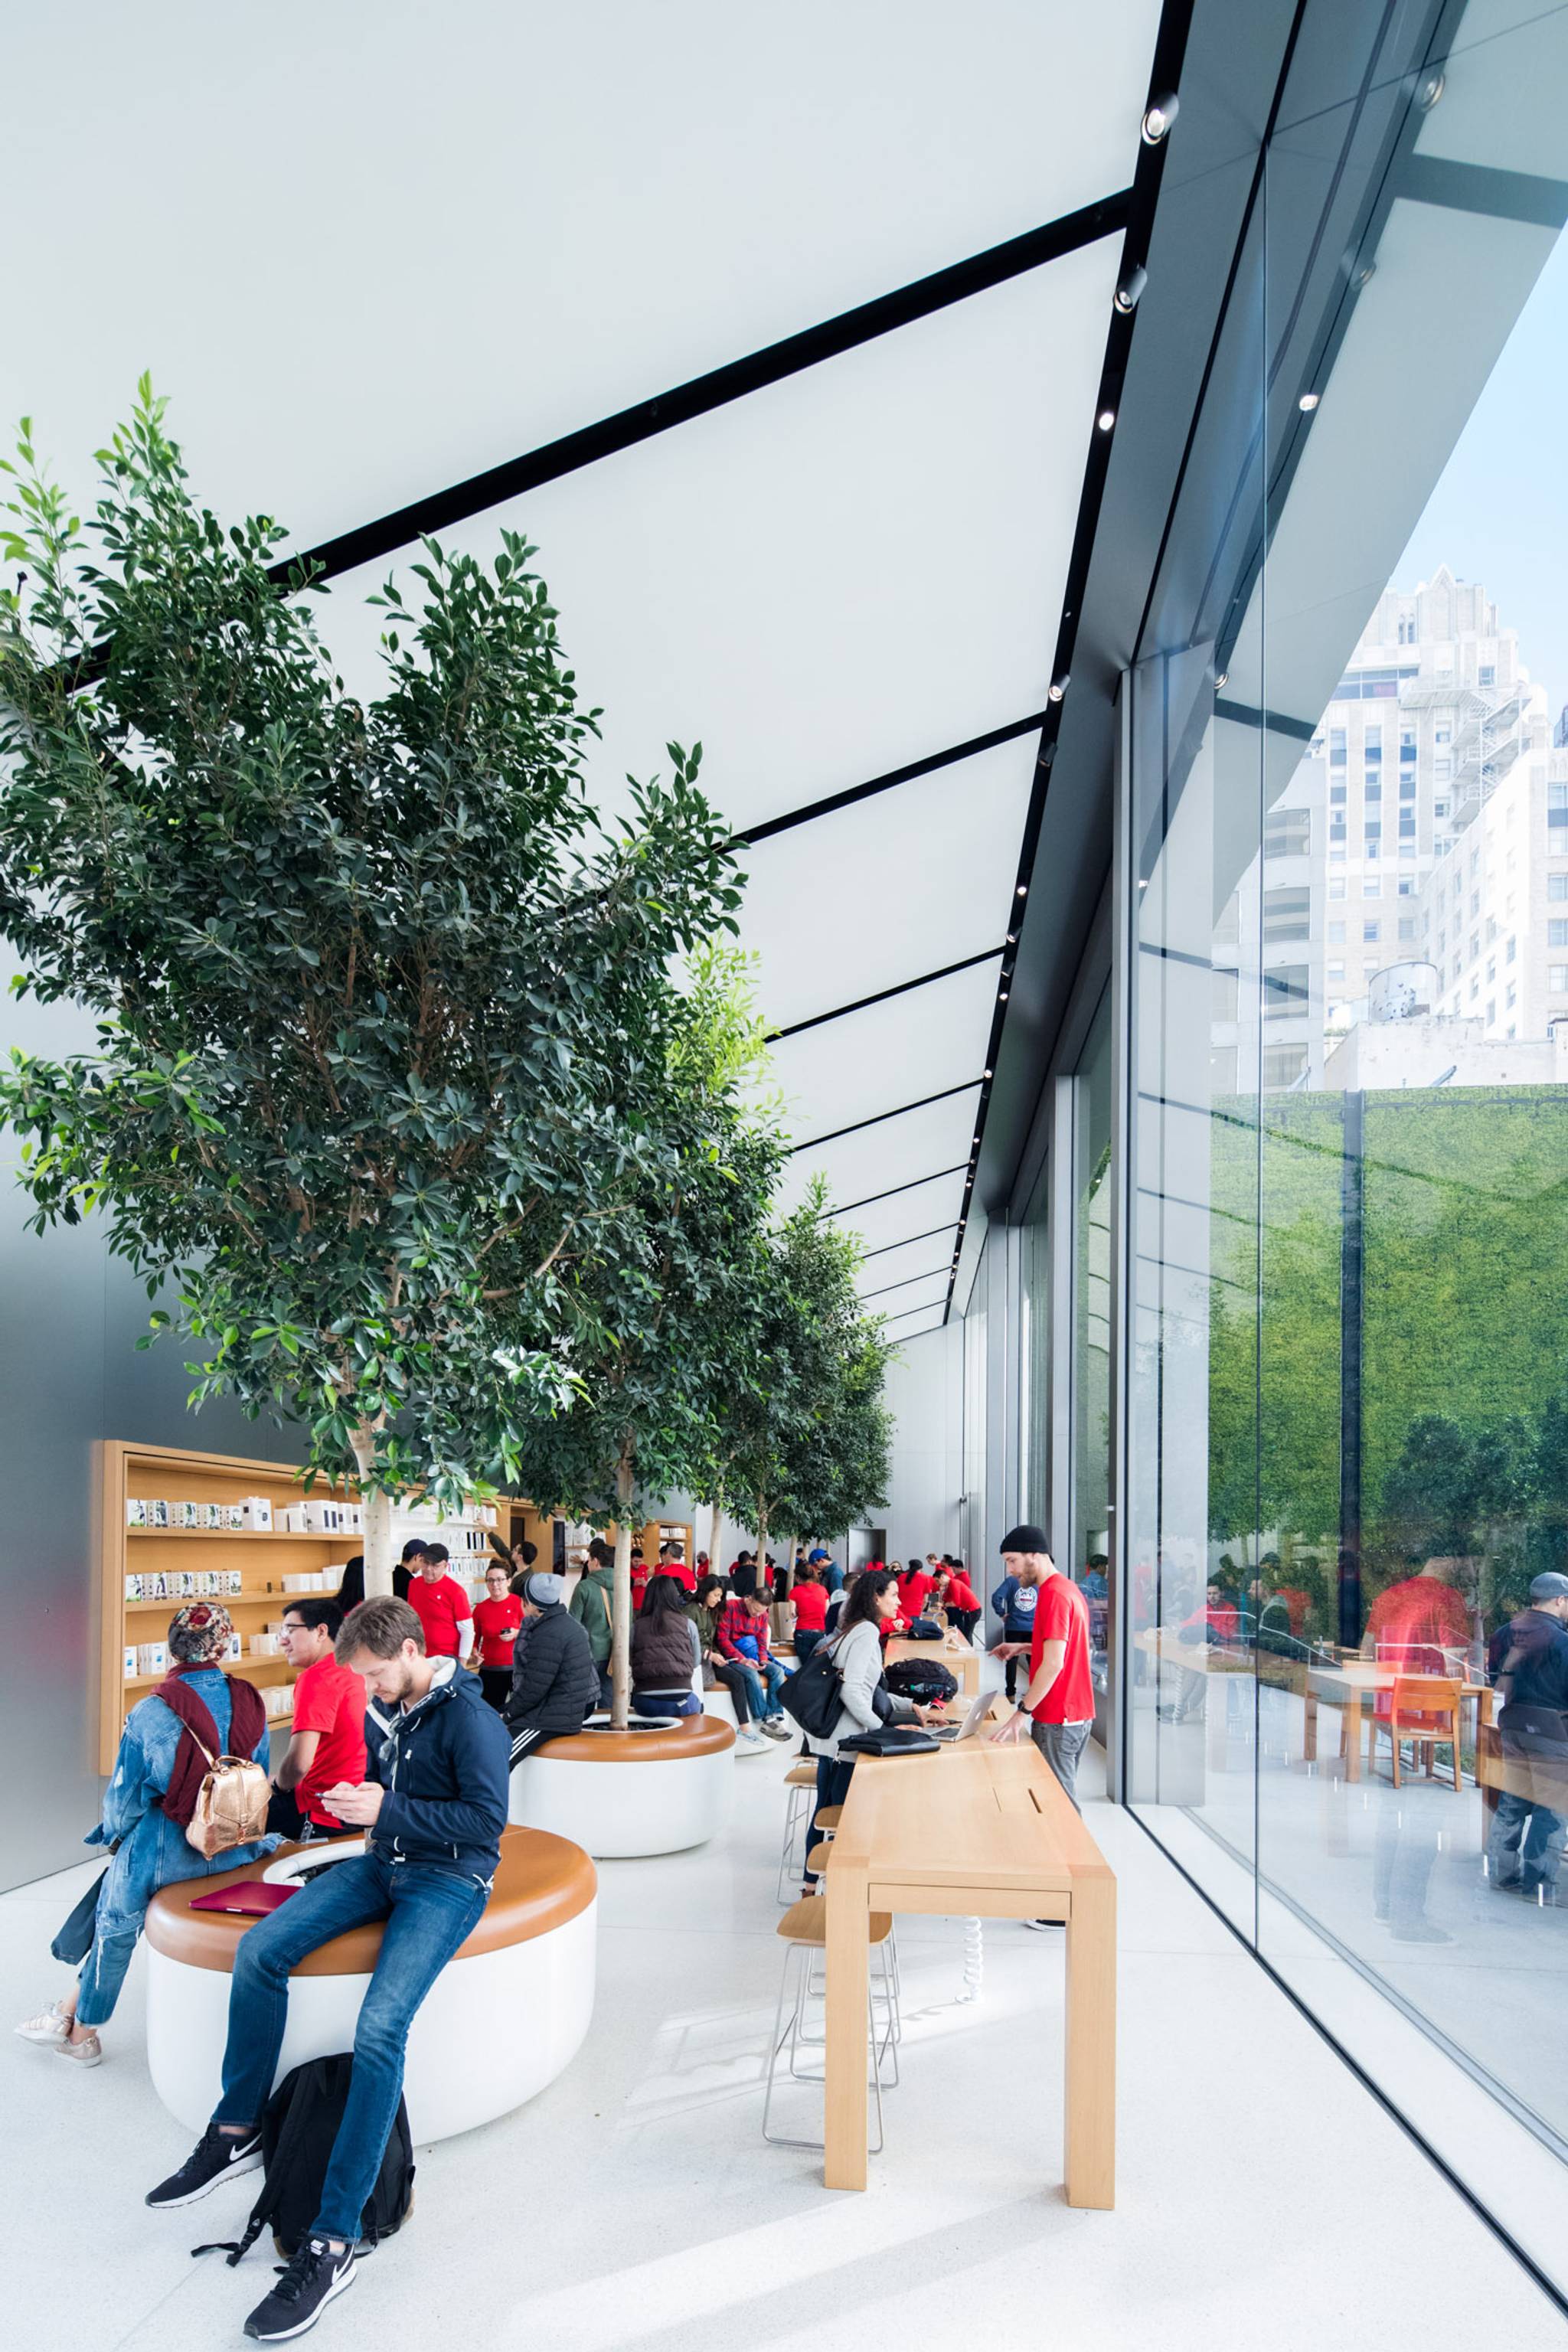 Apple is remodelling its stores for Gen Z